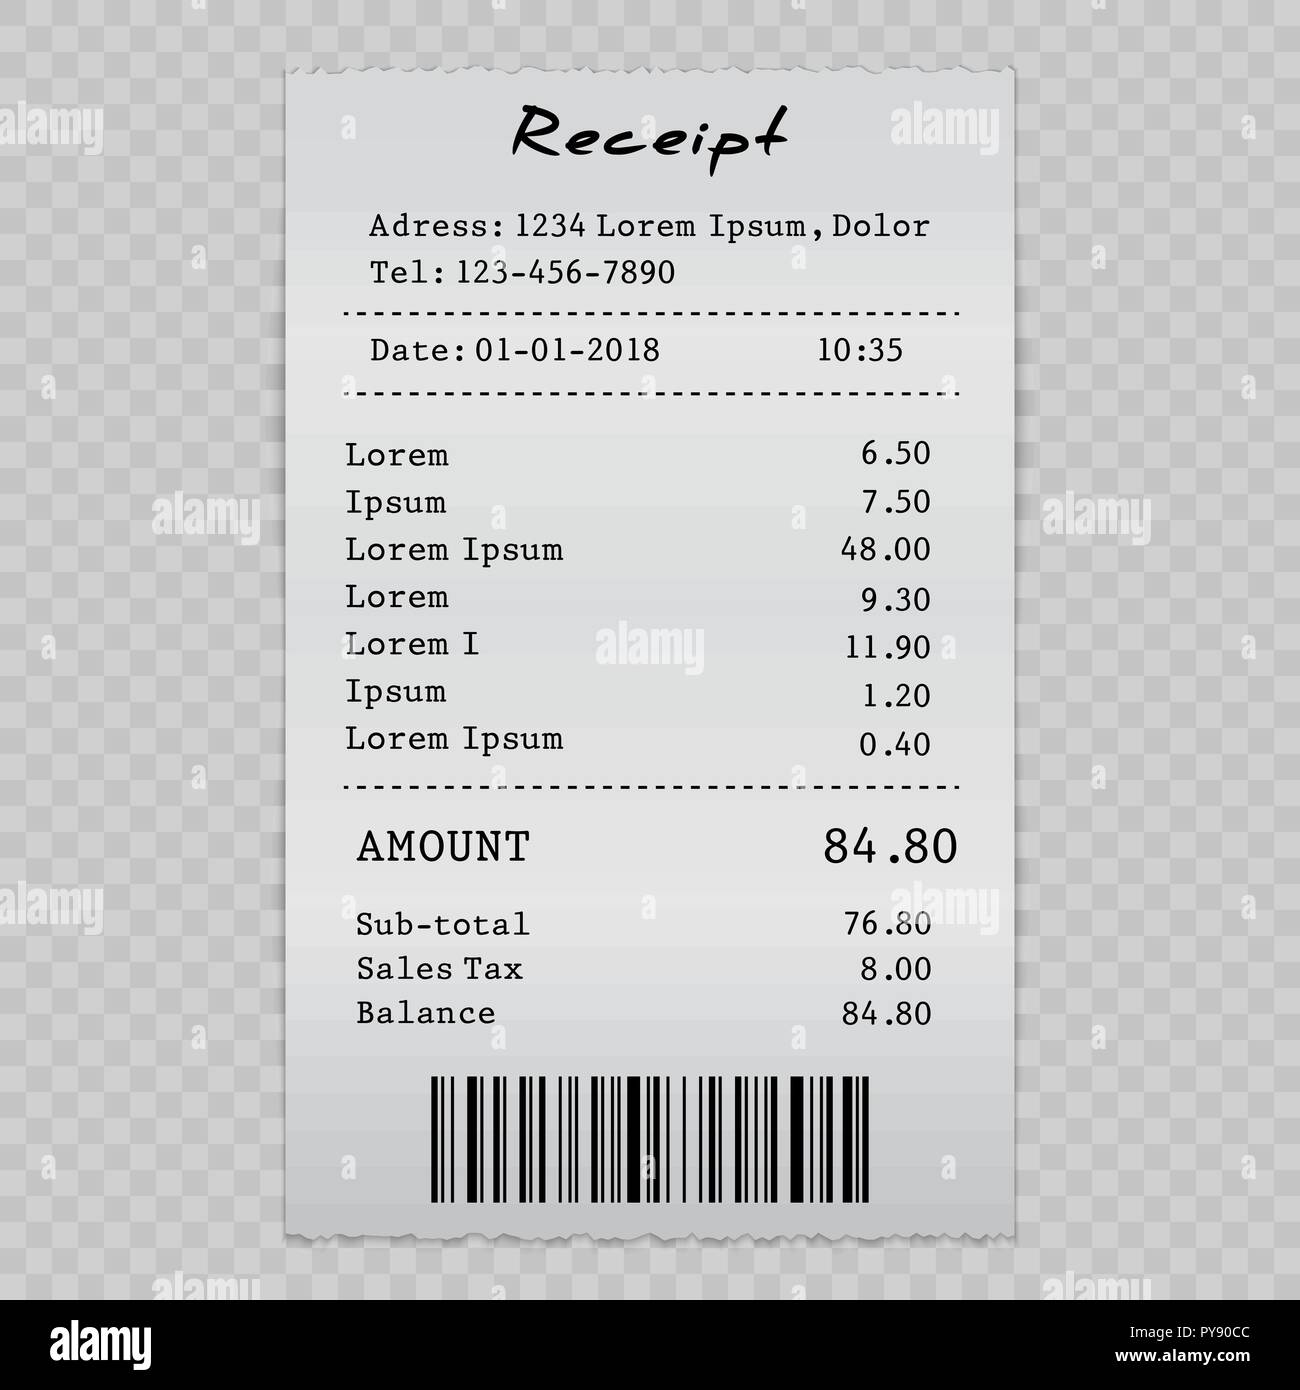 Black and white vector illustration of receipt template Stock Vector